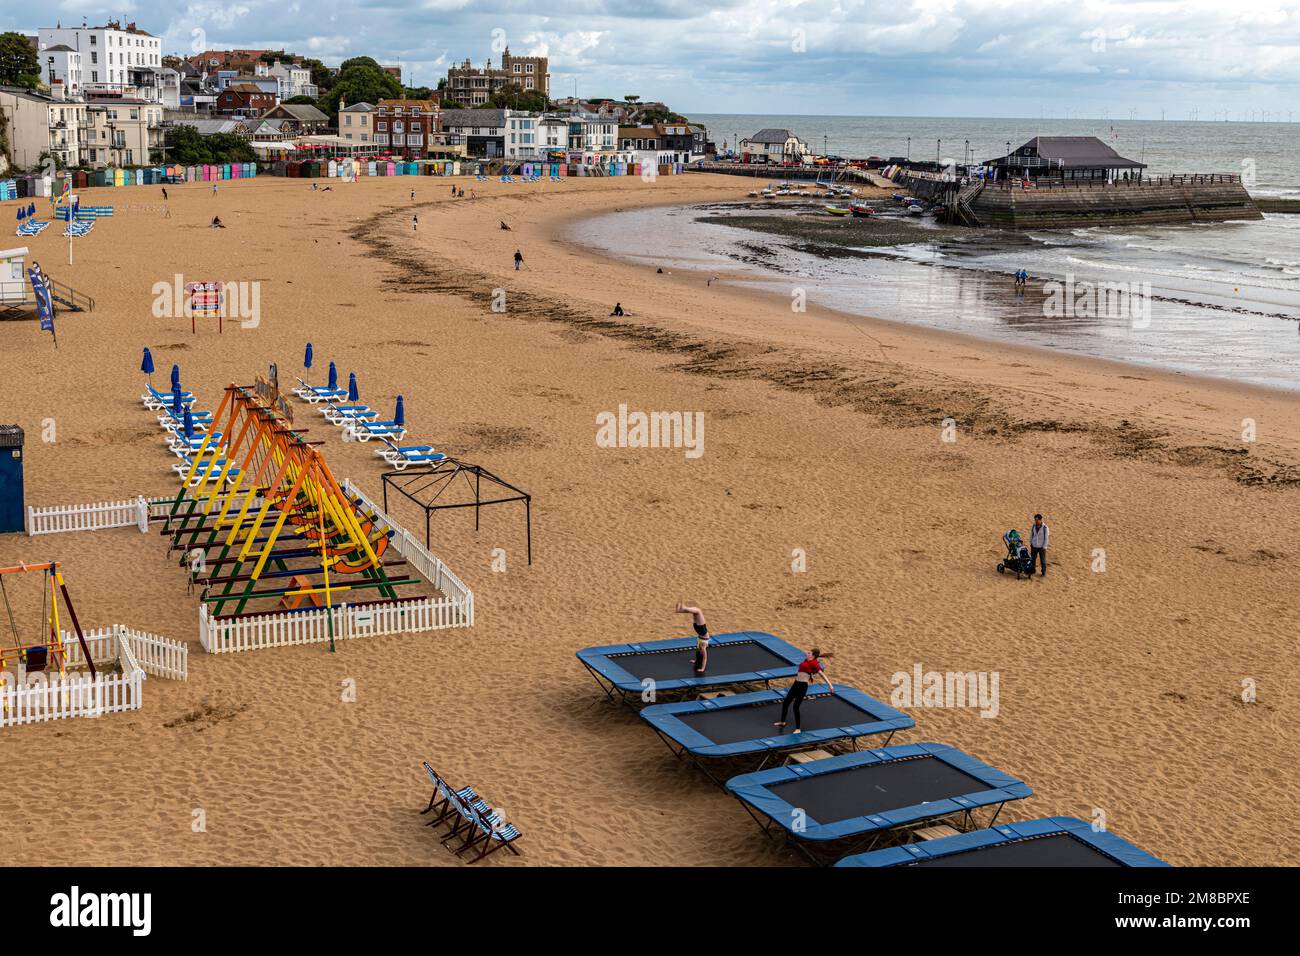 Broadstairs Viking beach and seafront, Kent Stock Photo